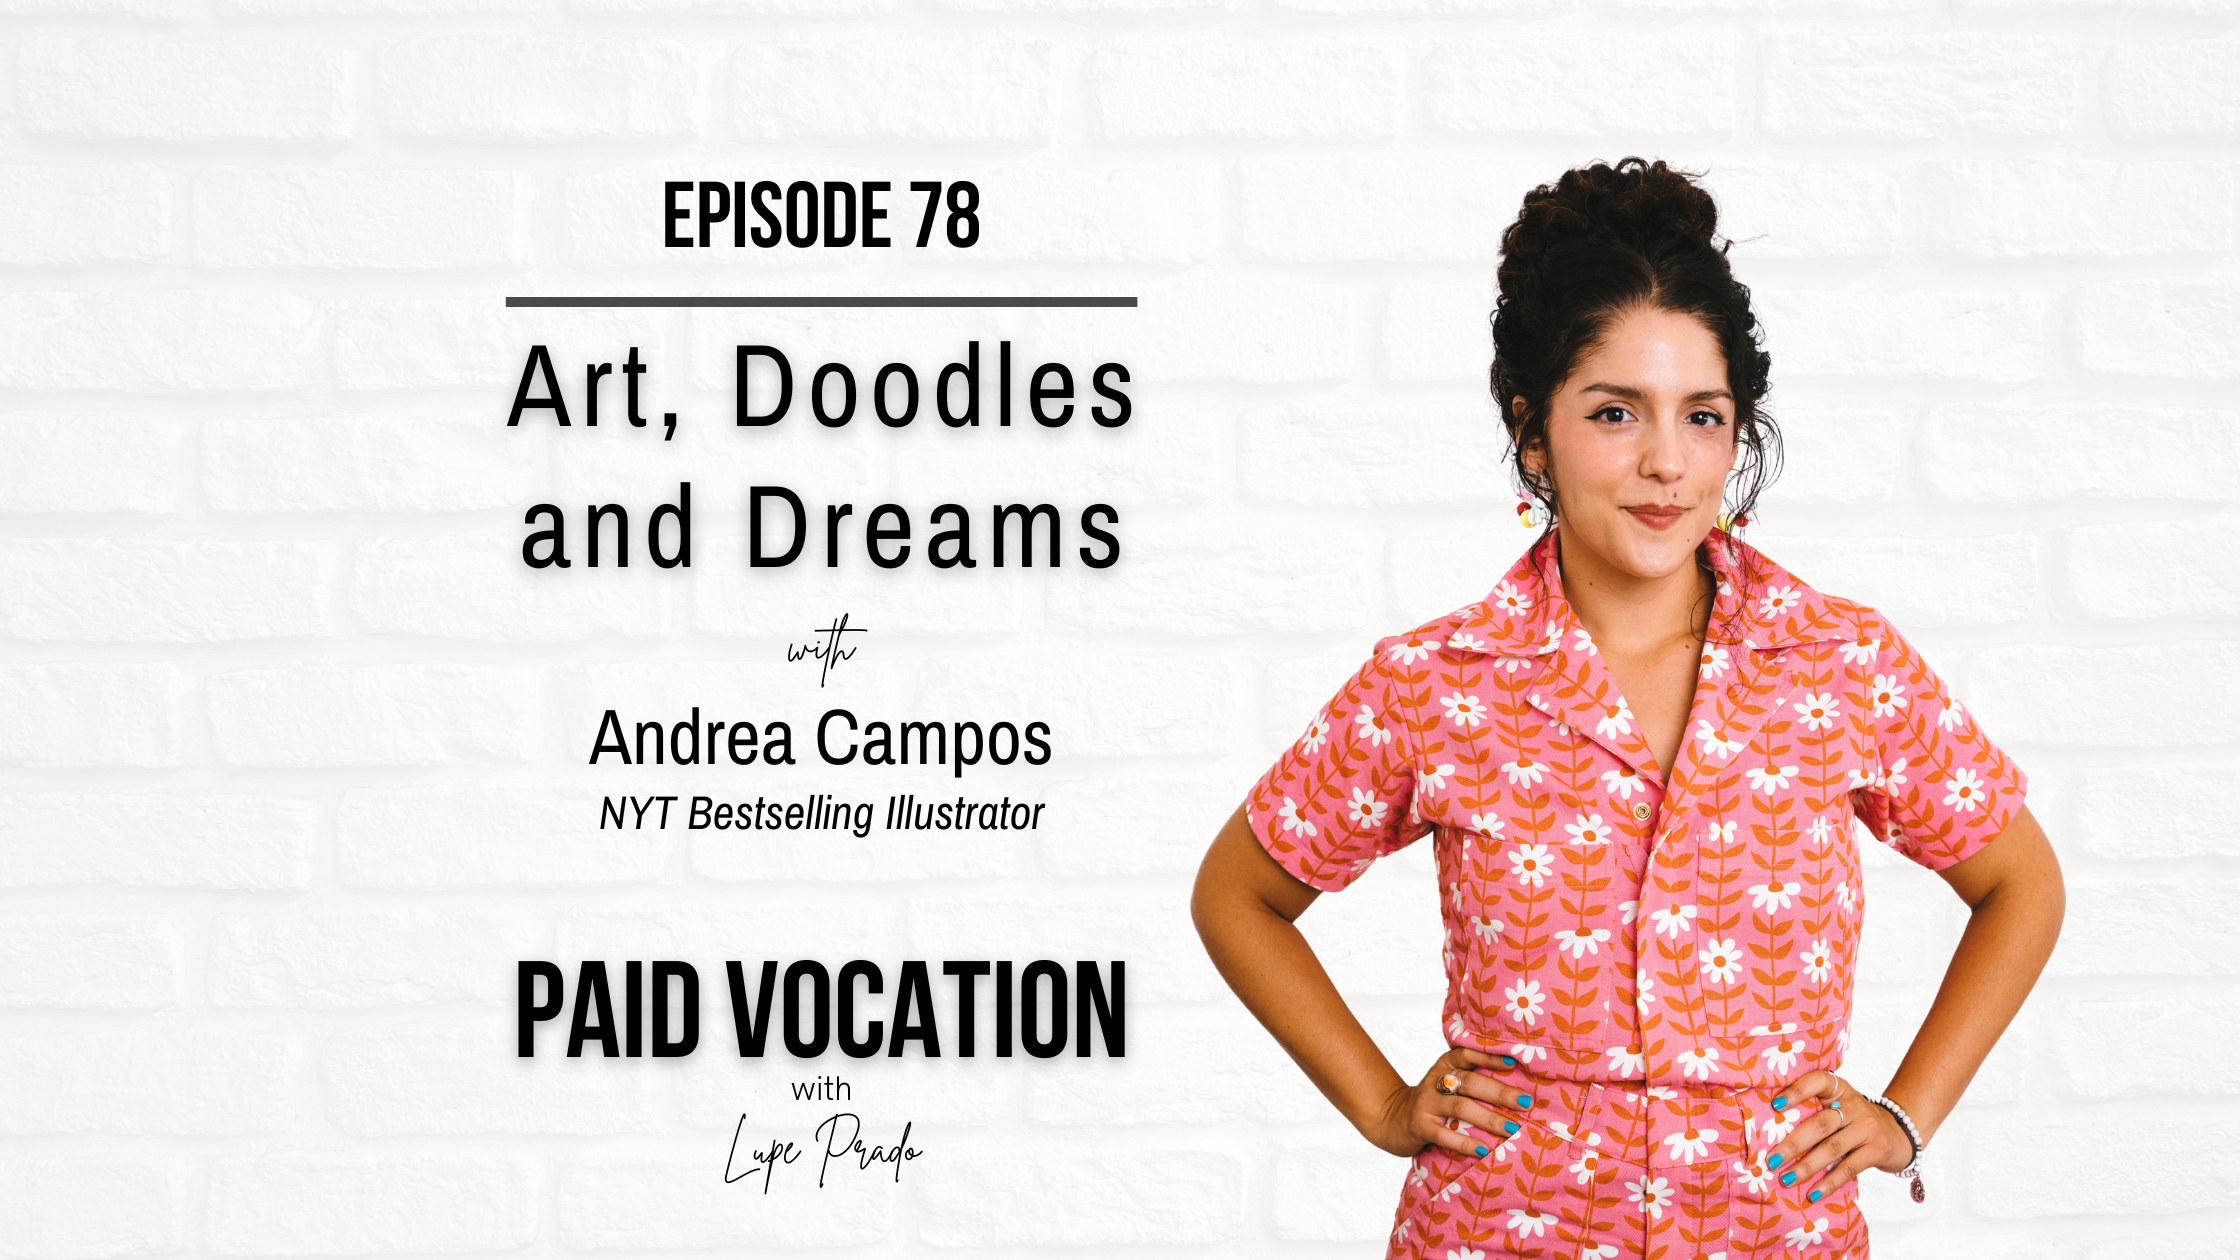 Art, Doodles and Dreams with NYT Bestselling Illustrator Andrea Campos